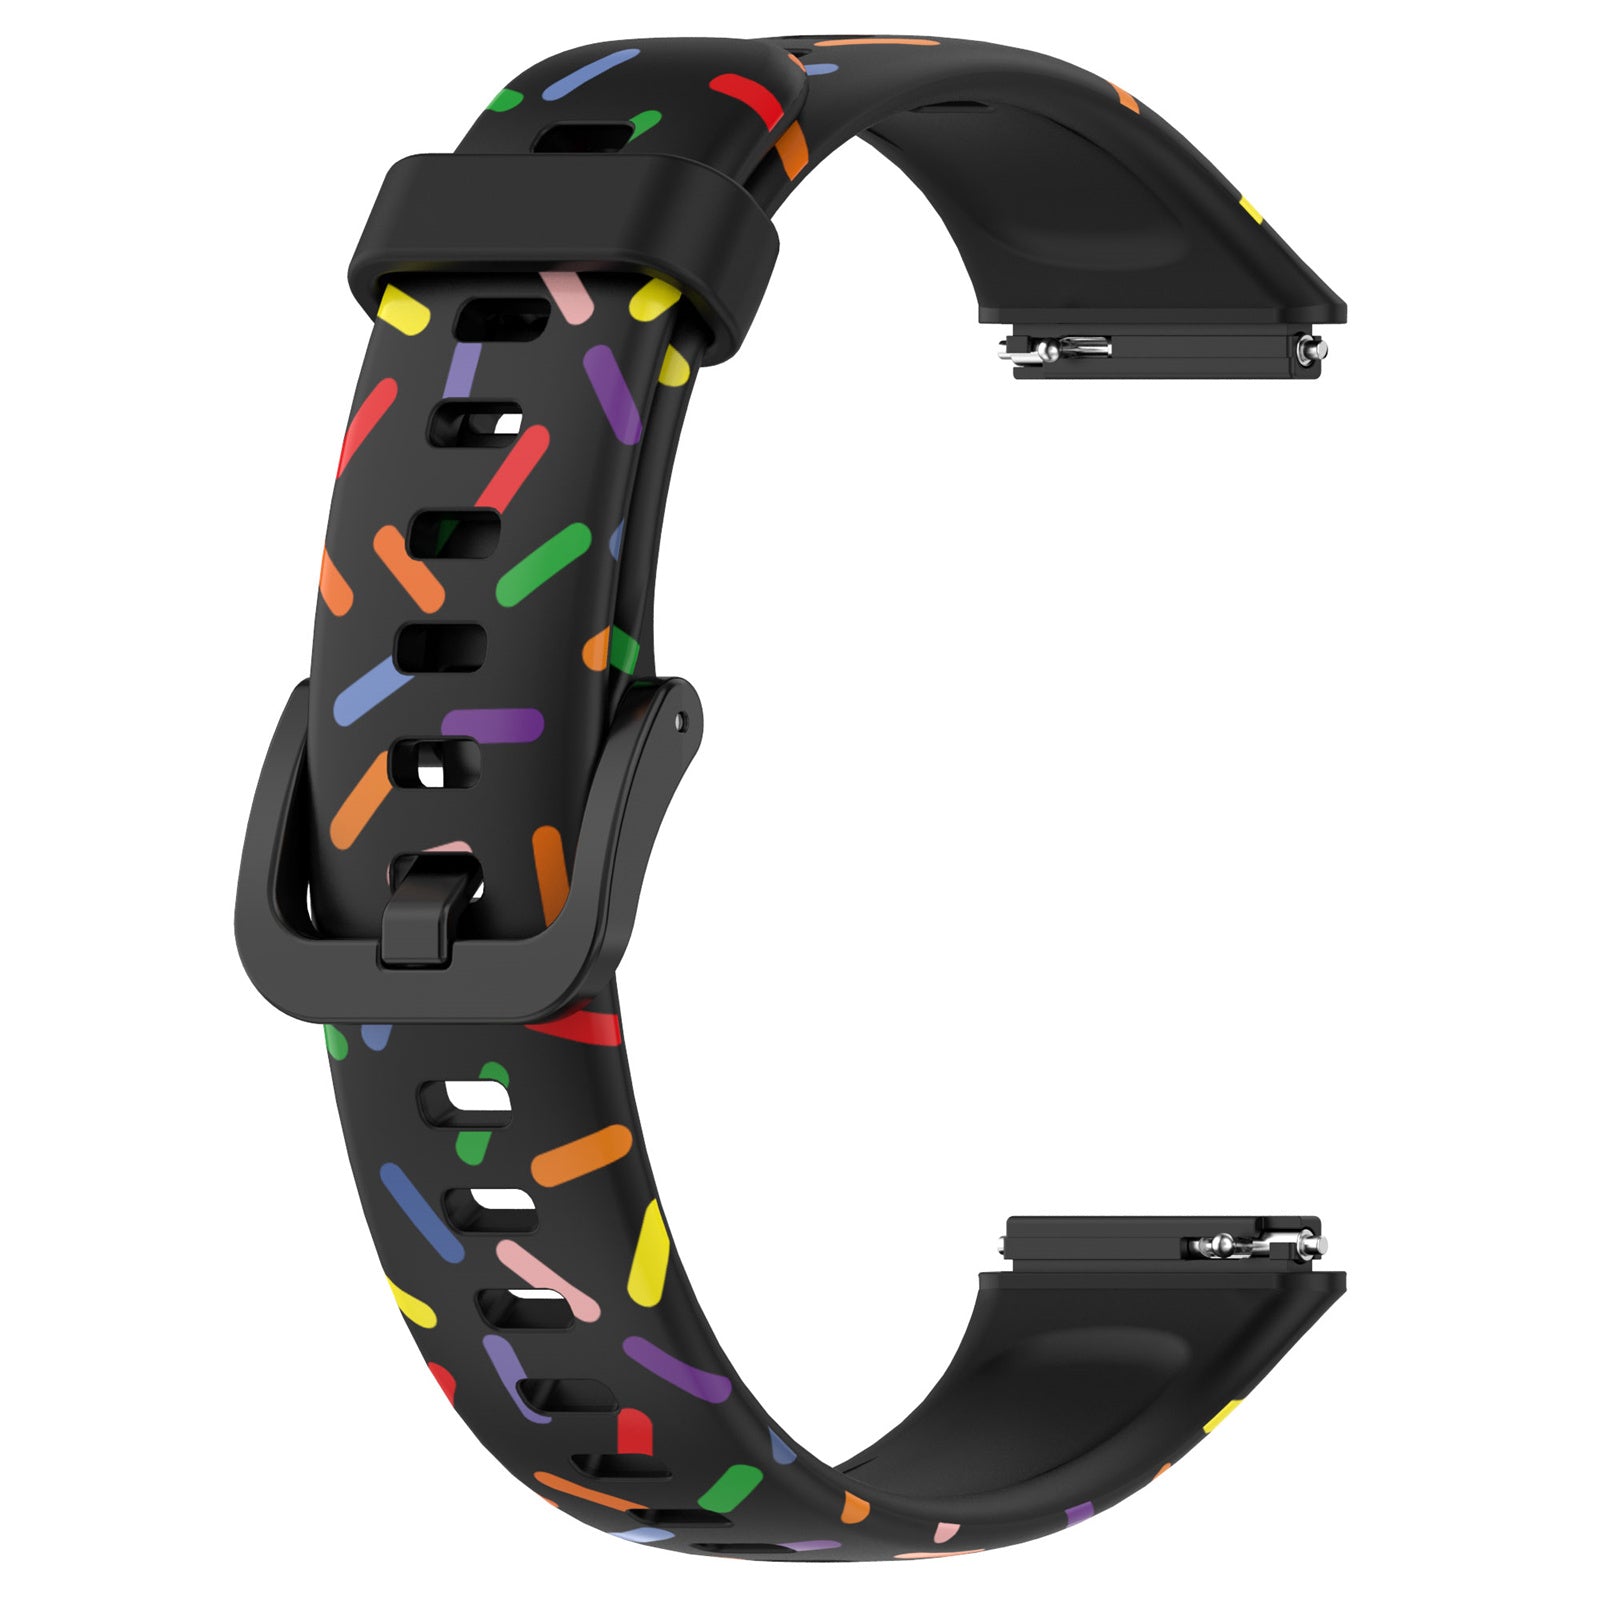 Uniqkart for Huawei Band 7 Colorful Spotted Wrist Band Replacement Silicone Watch Strap - Black